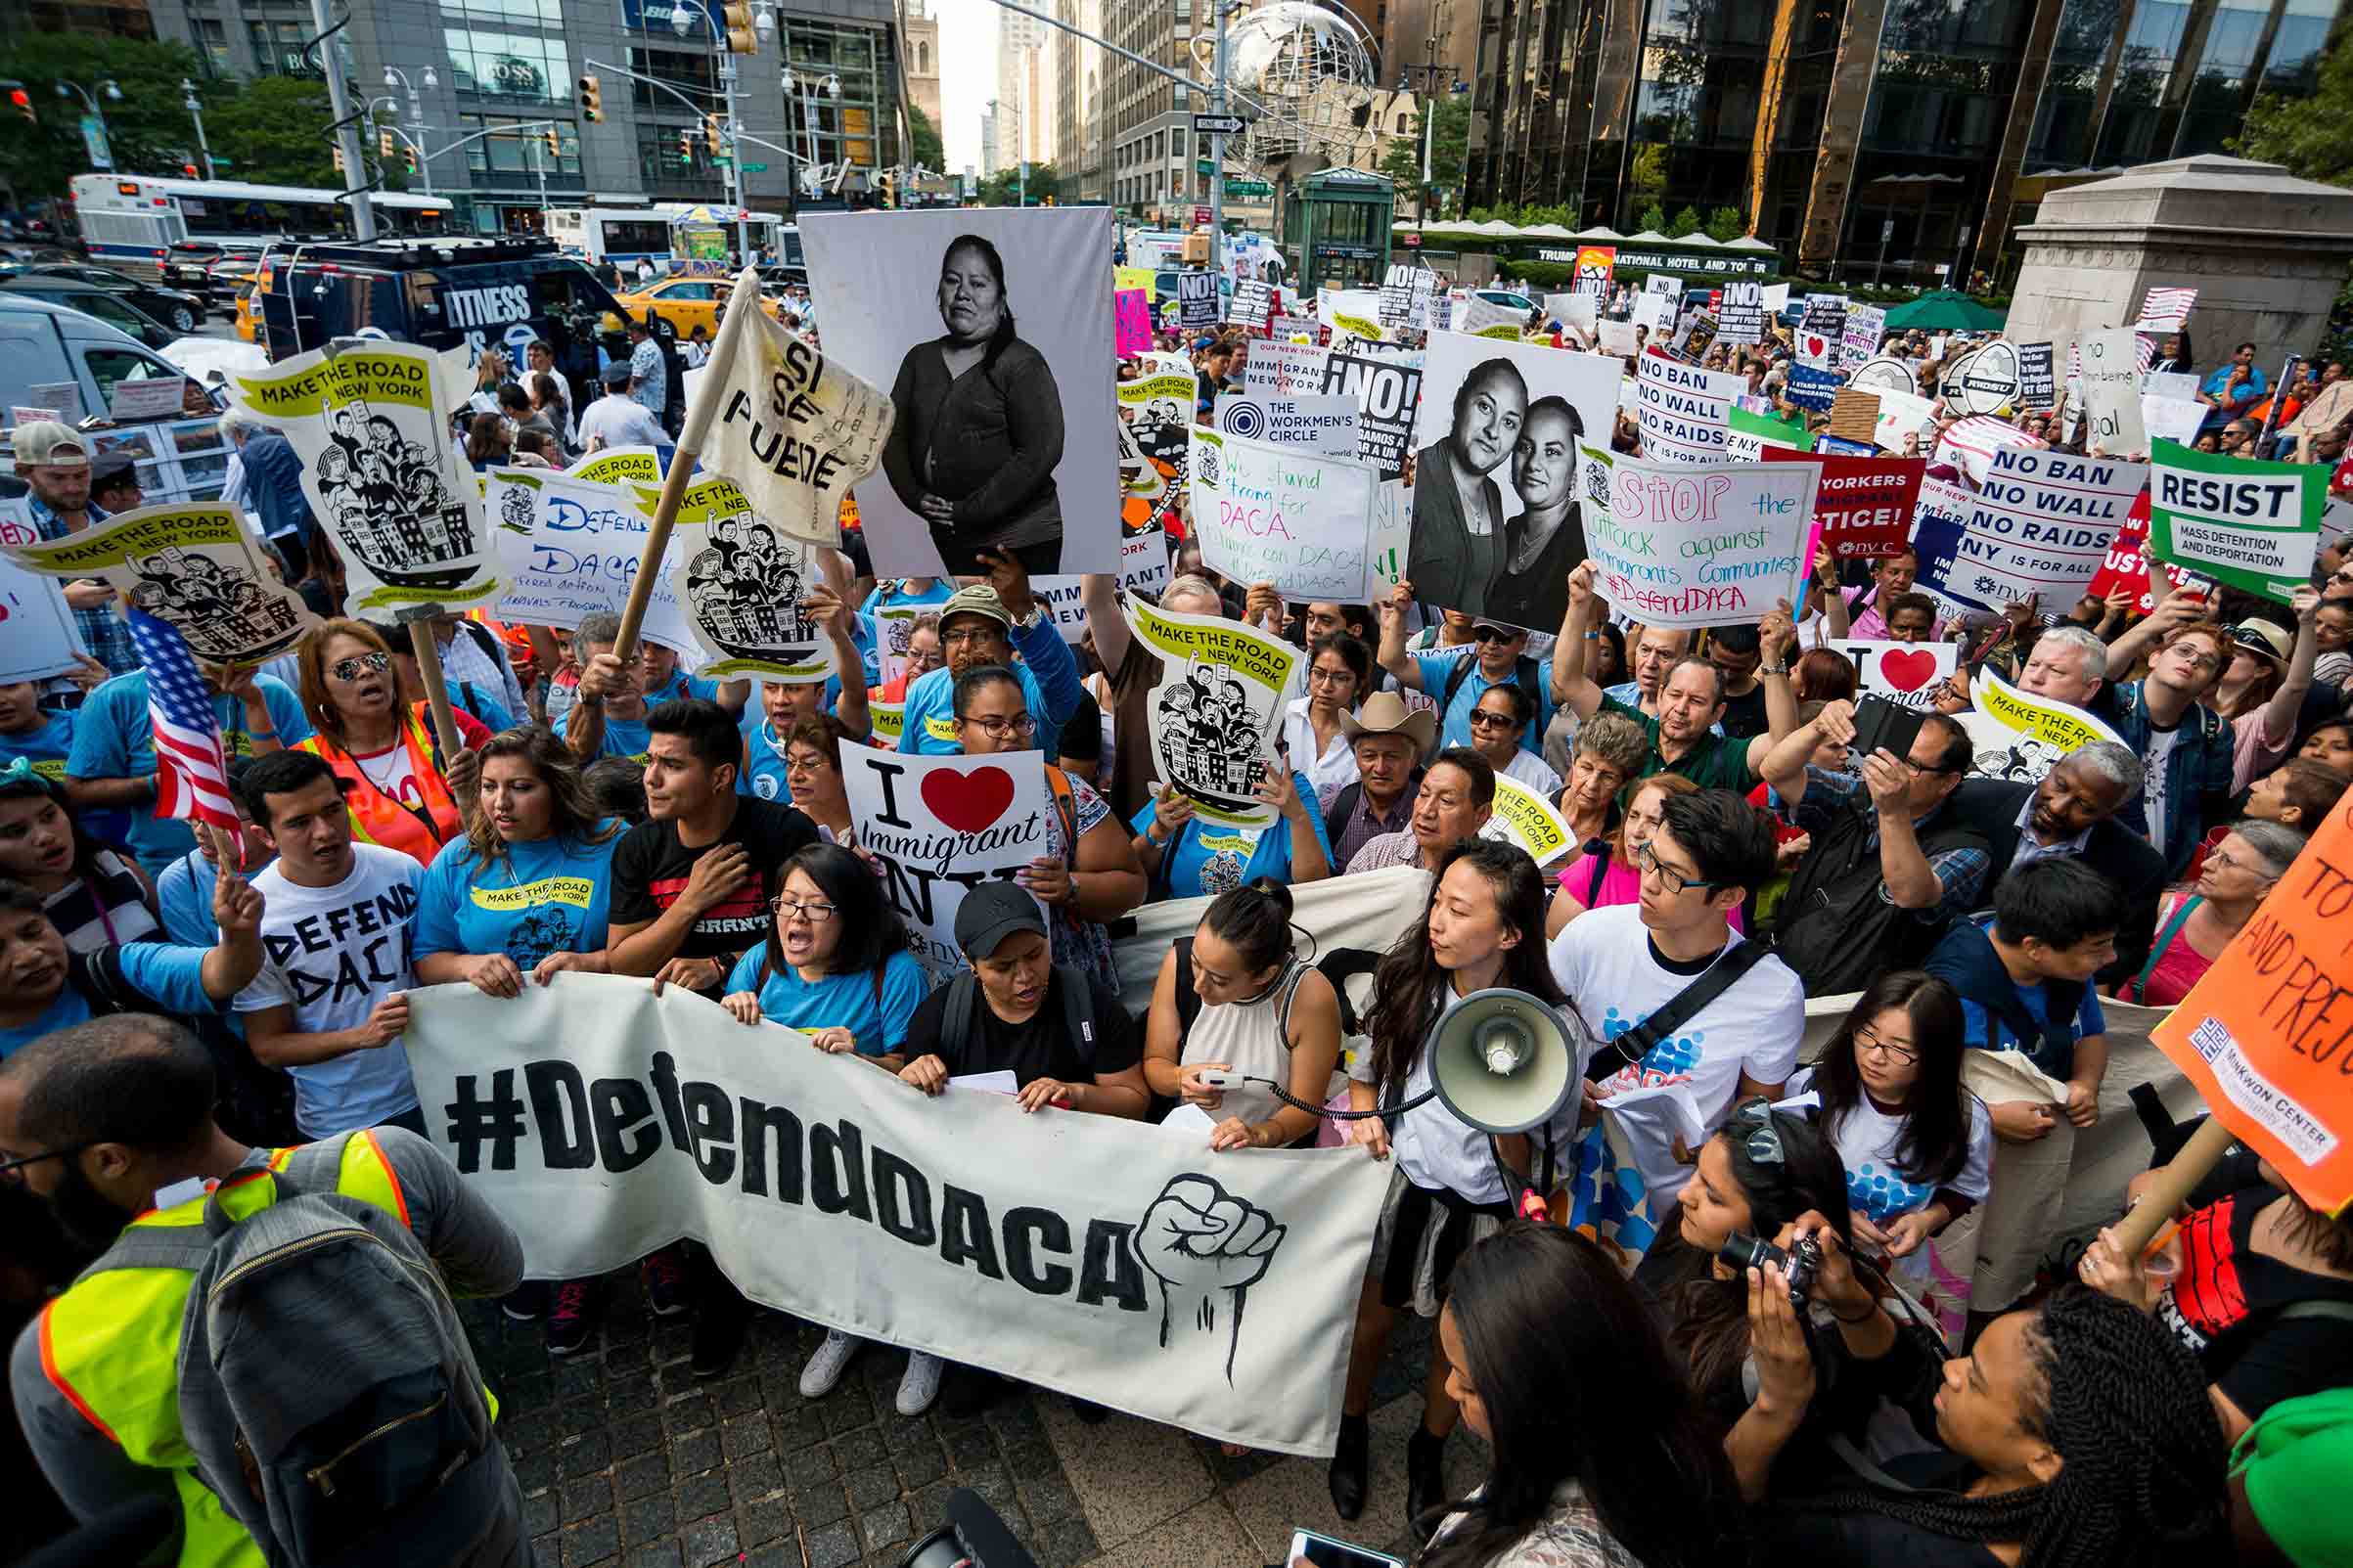 Activists rallied in Columbus Circle and marched from there to Trump Tower in protest of President Donald Trump's possible elimination of the Obama-era "Deferred Action for Childhood Arrivals" (DACA) which curtails deportation of an estimated 800,000 undocumented immigrants. (Albin Lohr-Jones—Pacific Press/LightRocket/Getty Images)